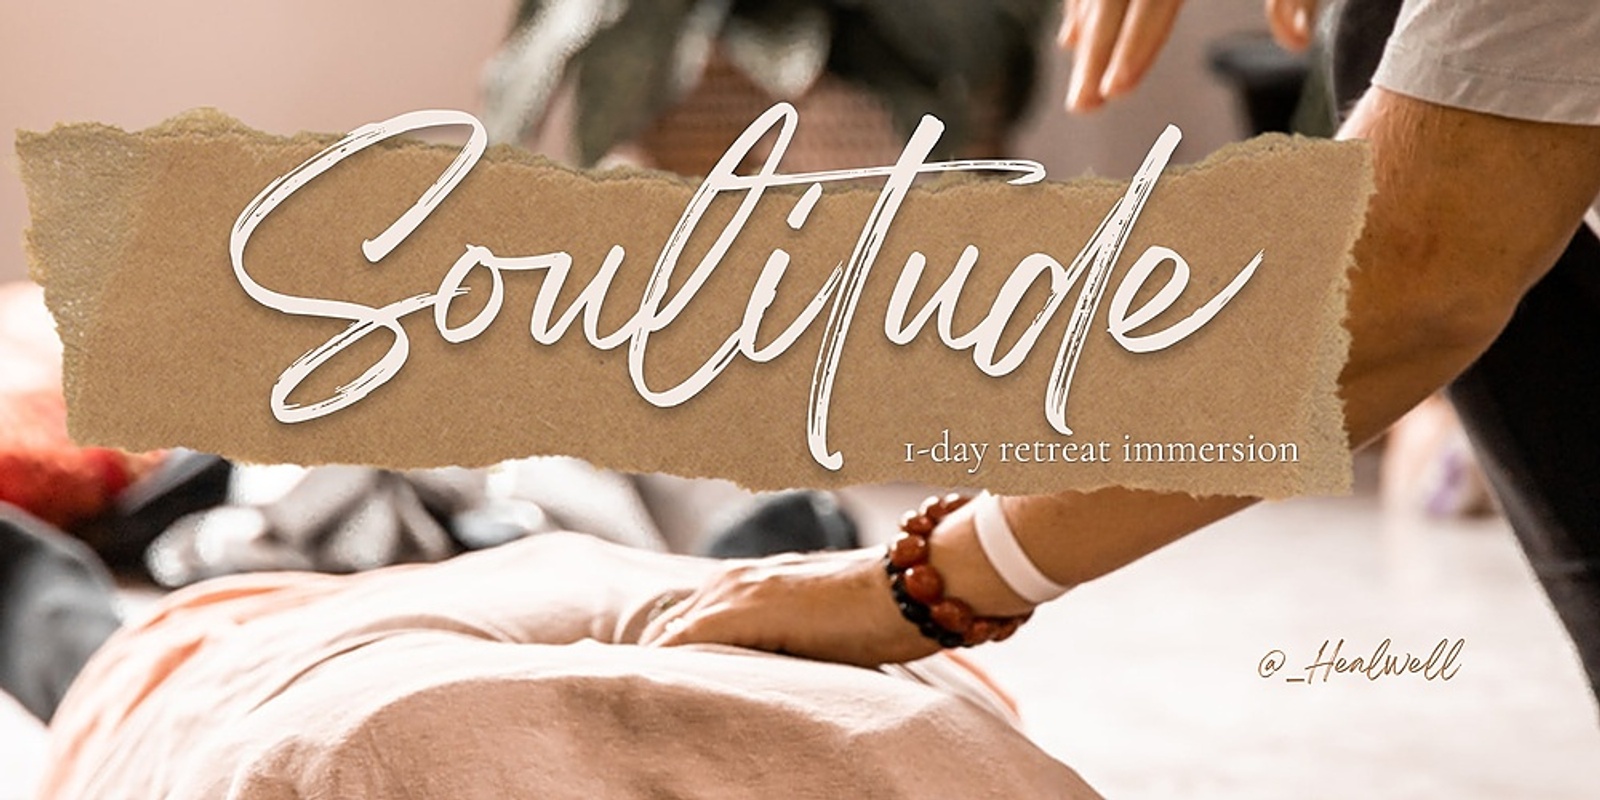 Banner image for Soulitude - A 1 day immersive retreat experience